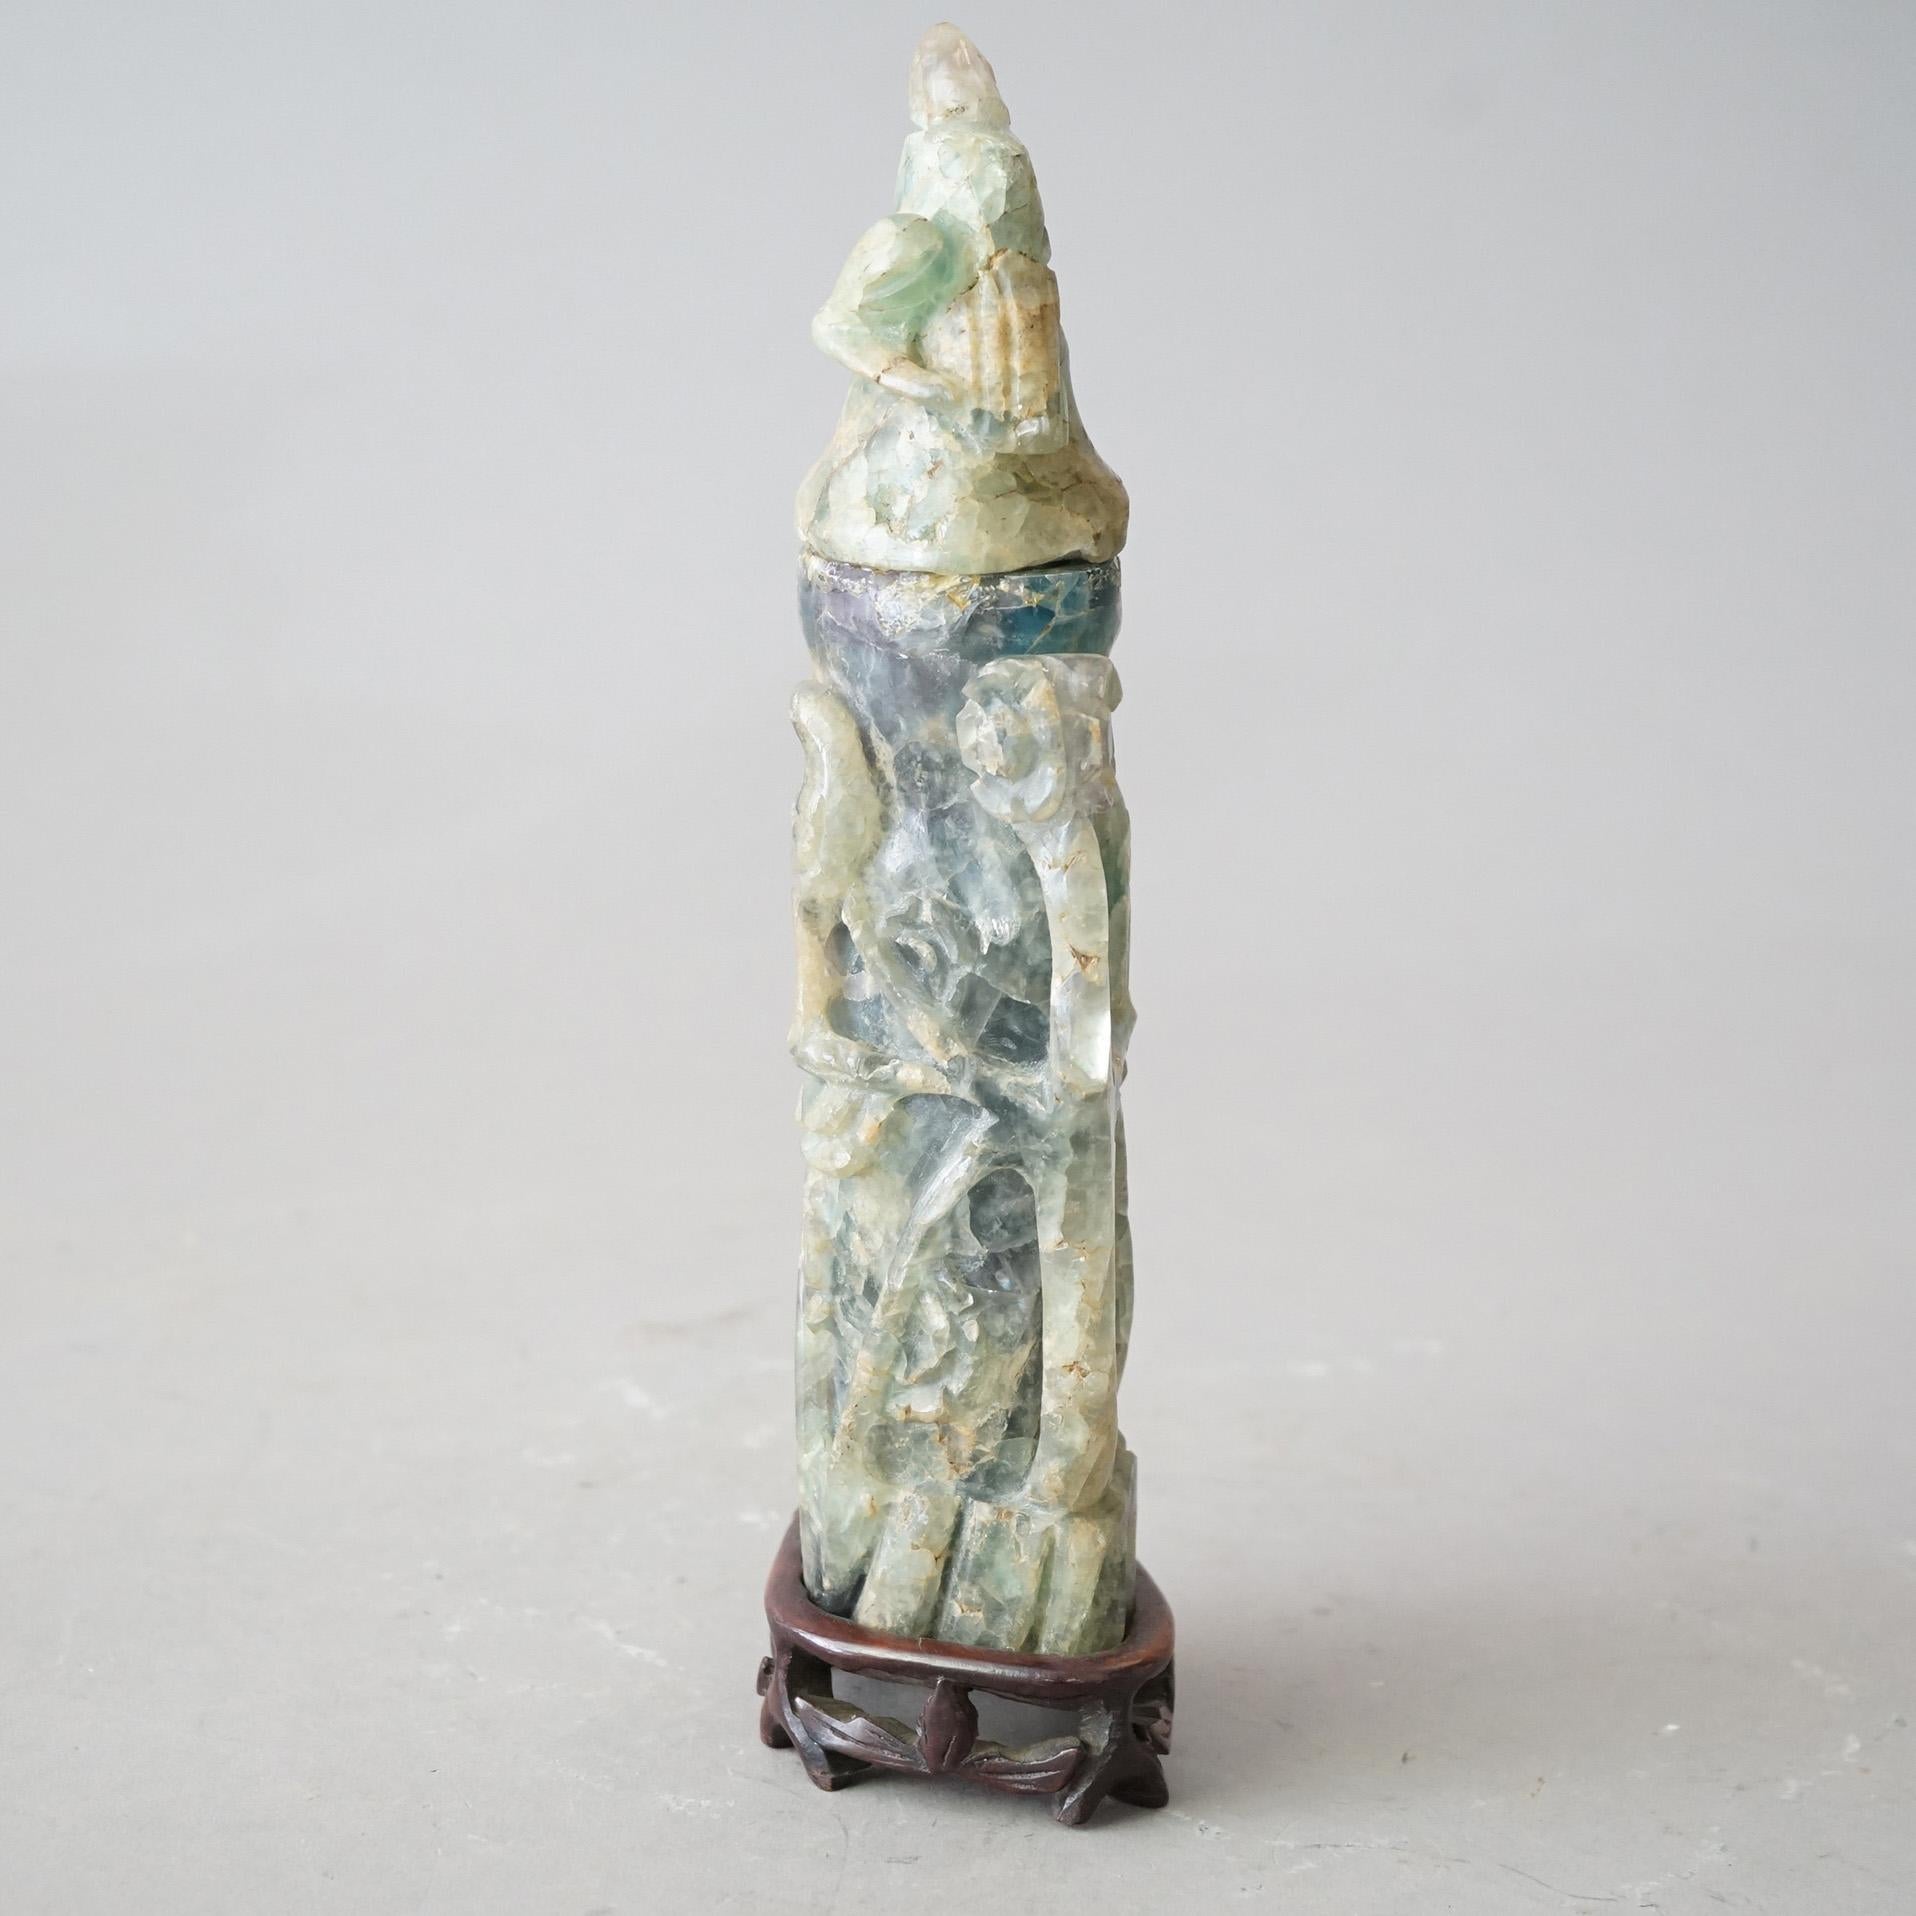 Antique Asian Carved Jade Soapstone Sculpture with Birds C1890

Measures - 11.5